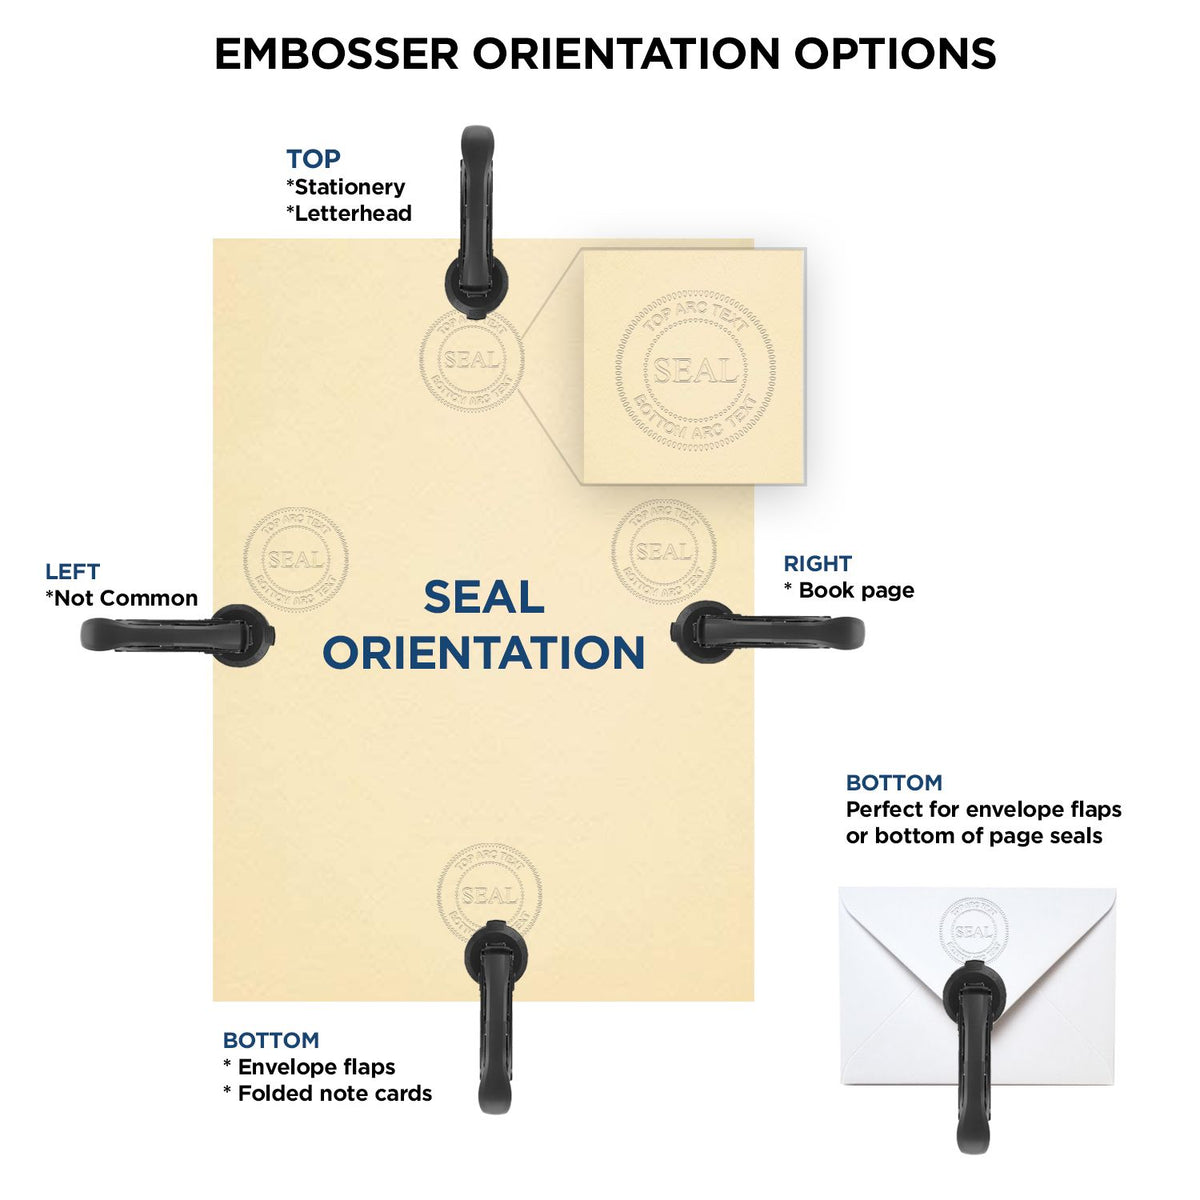 An infographic for the Hybrid Florida Land Surveyor Seal showing embosser orientation, this is showing examples of a top, bottom, right and left insert.